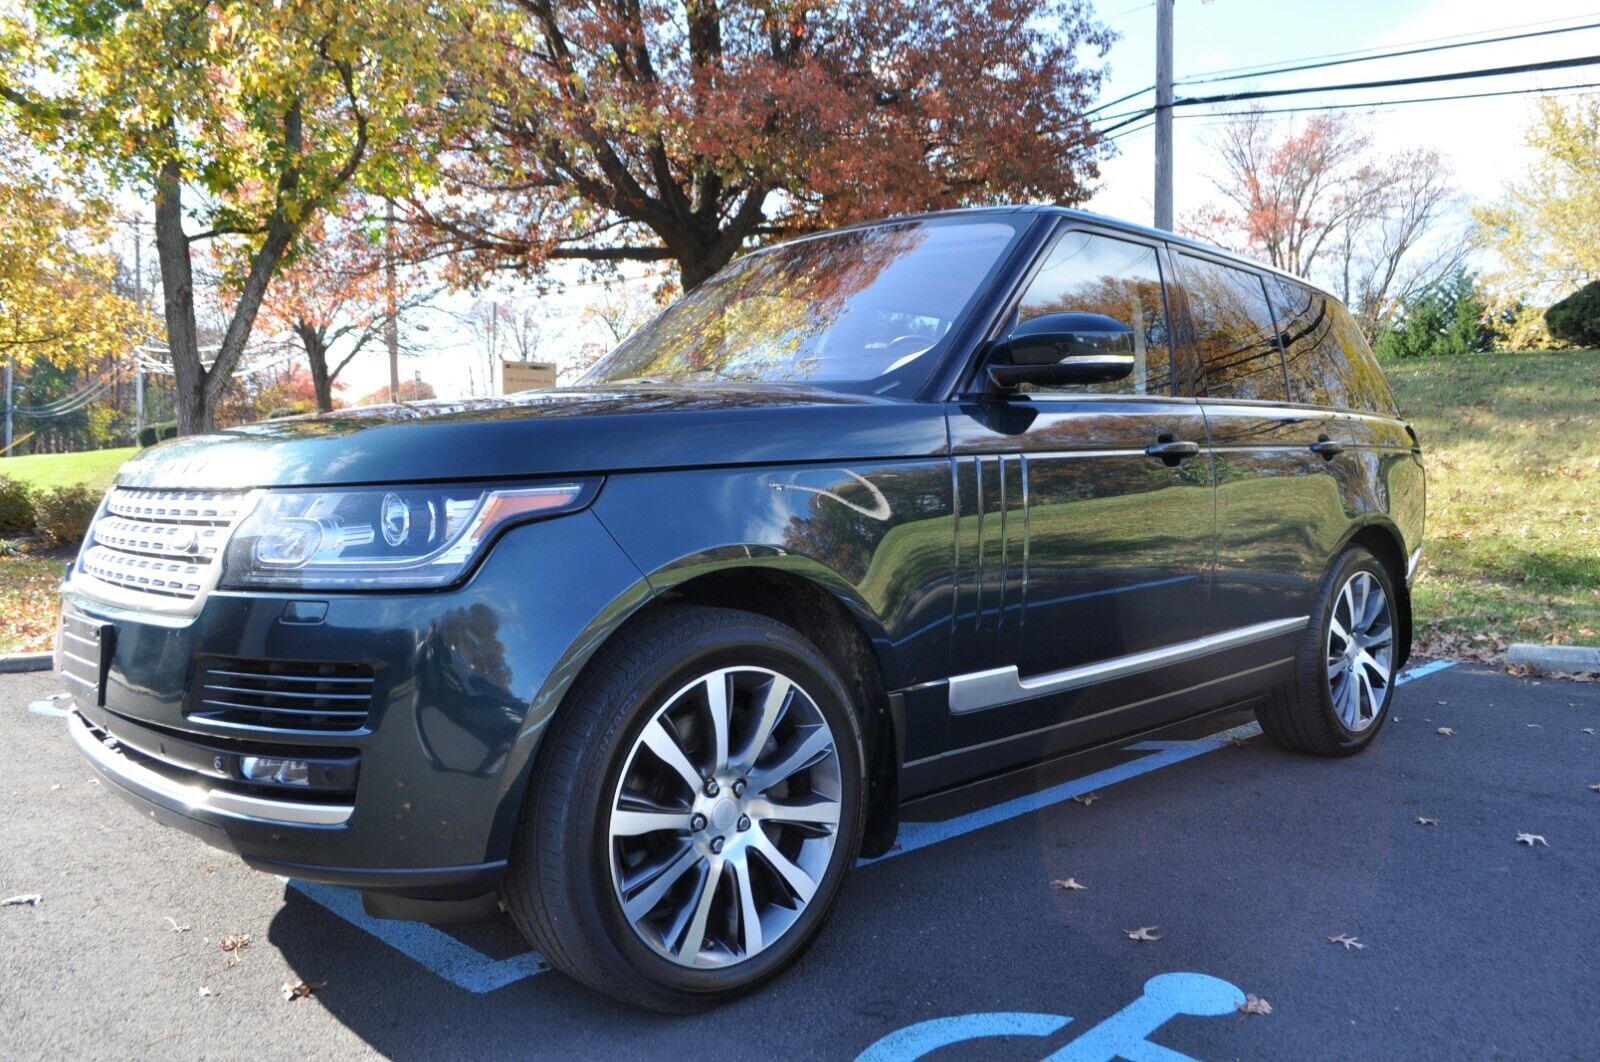 2015 Range Rover Supercharged in Like New Condition with New Timing Chain Kit!